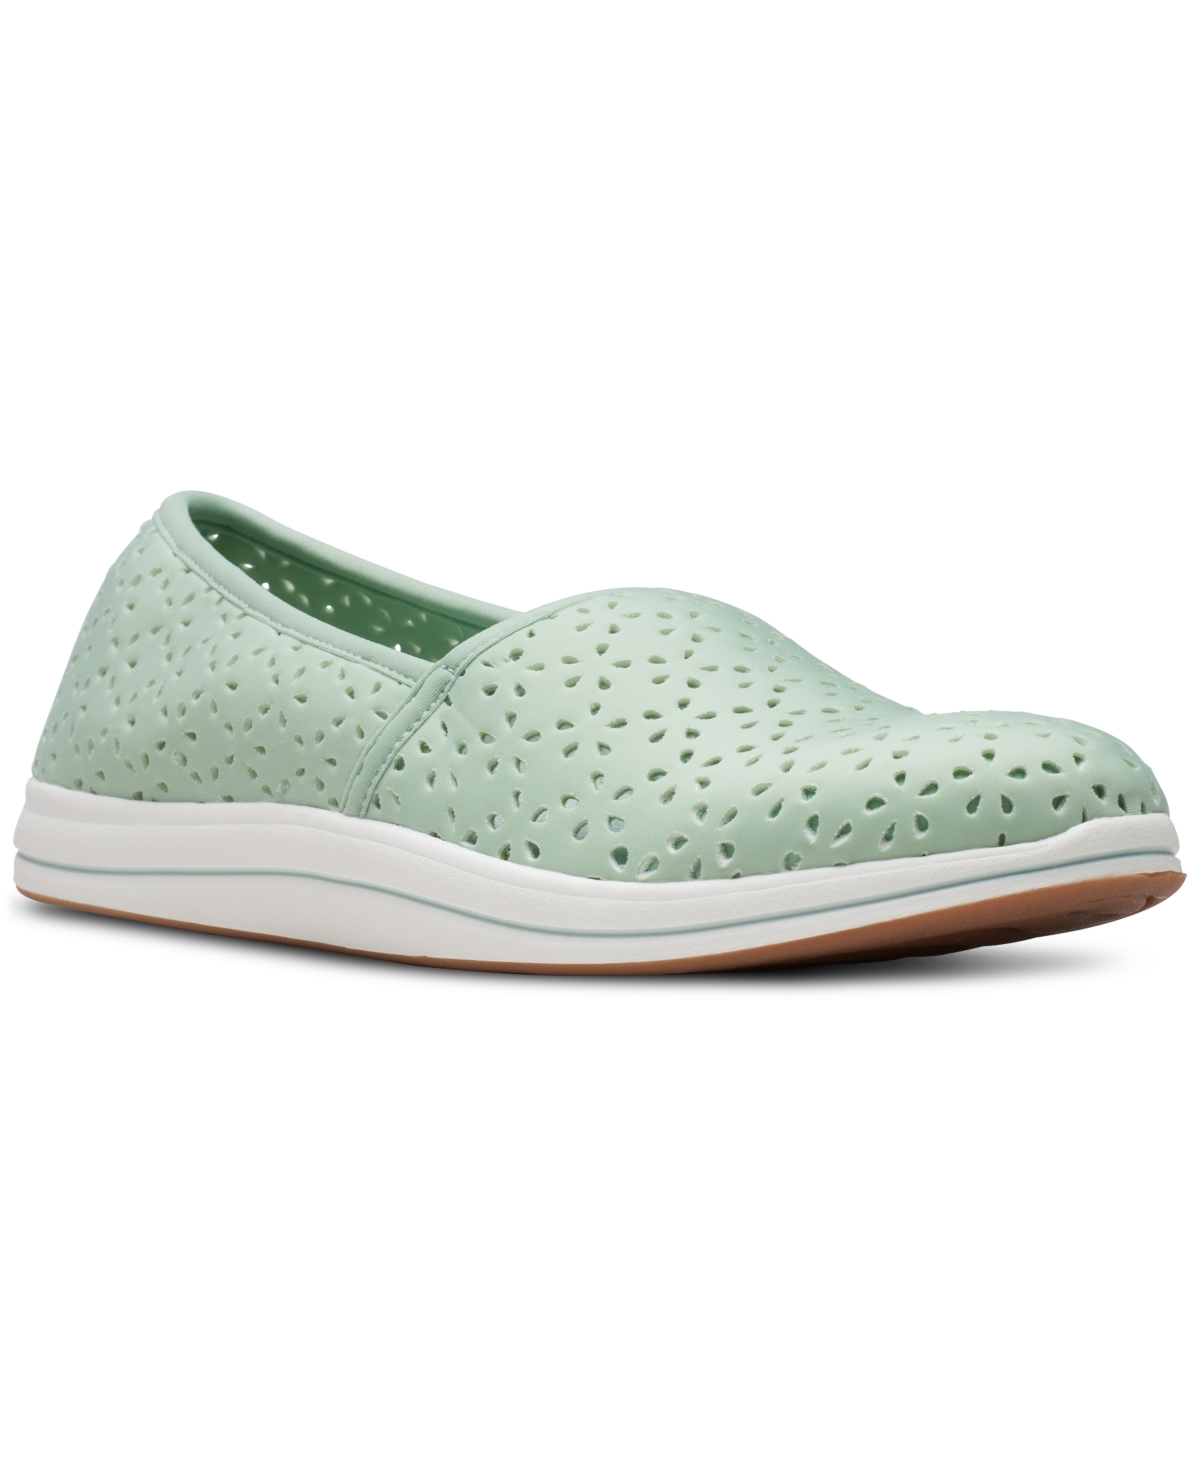 Clarks Women's Cloudsteppers Breeze Emily Perforated Loafer Flats In Pale Green